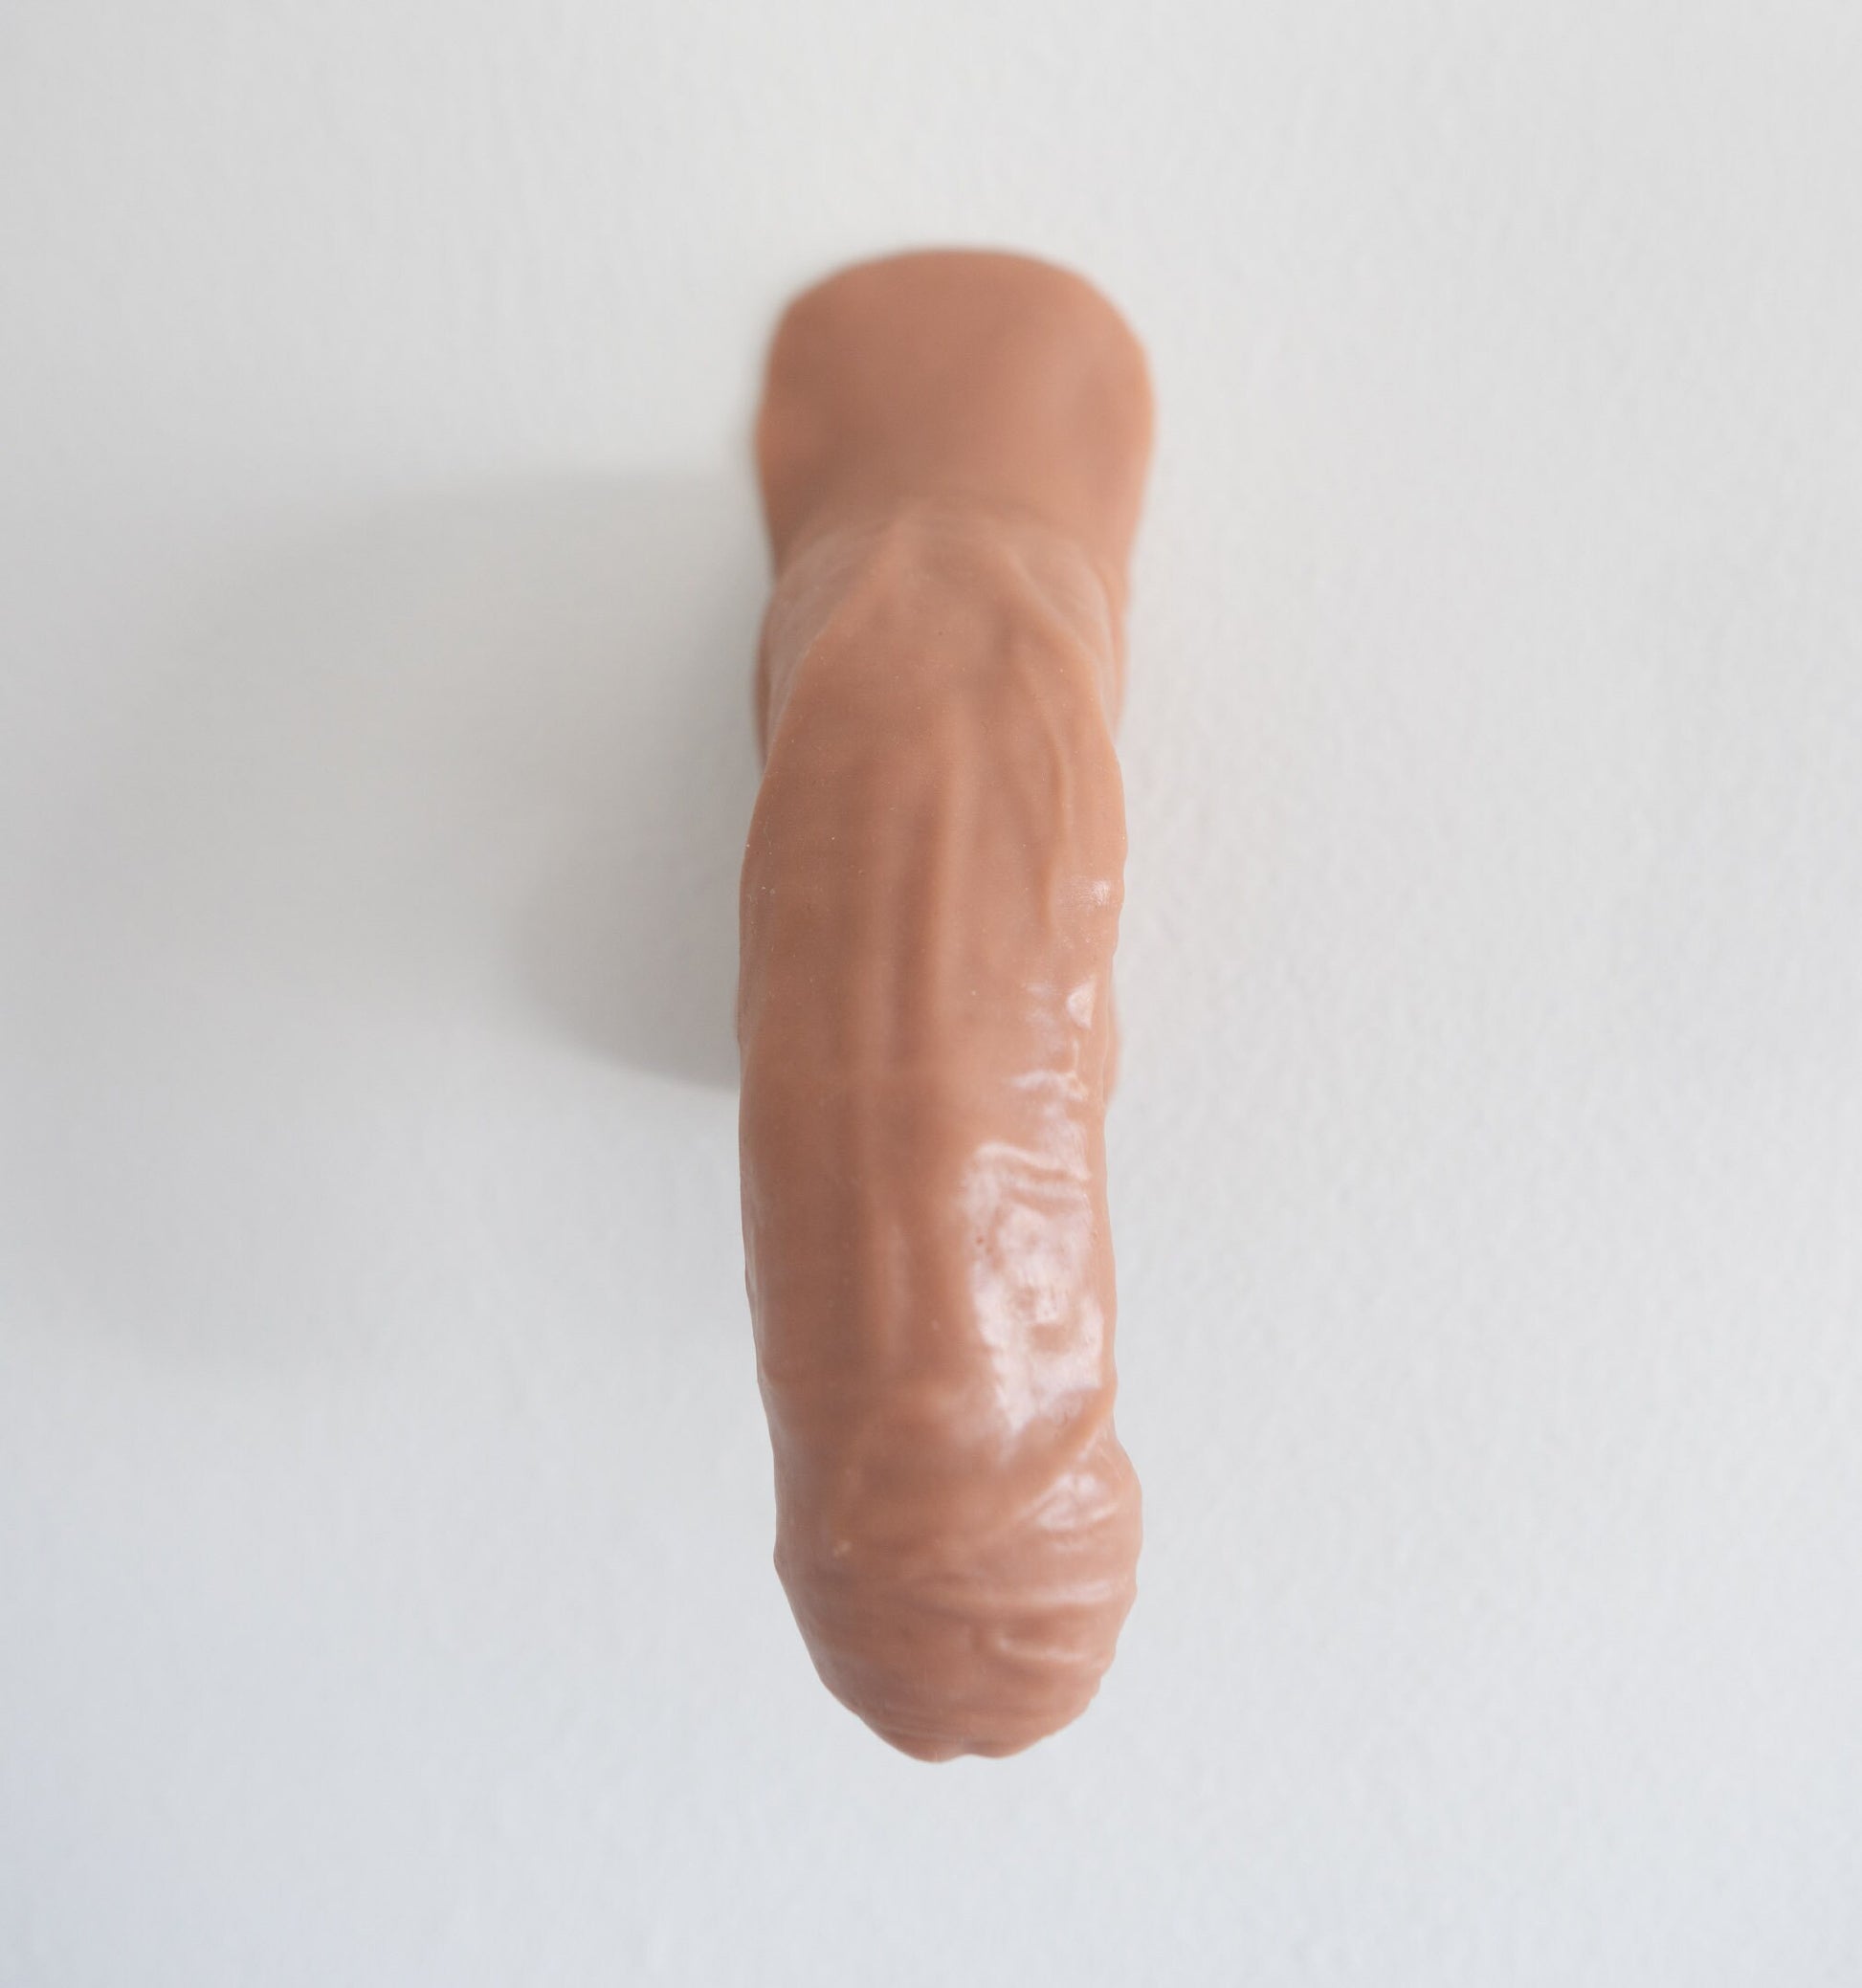 FTM Packer - 5.5 inch realistic penis - modeled after a real guy